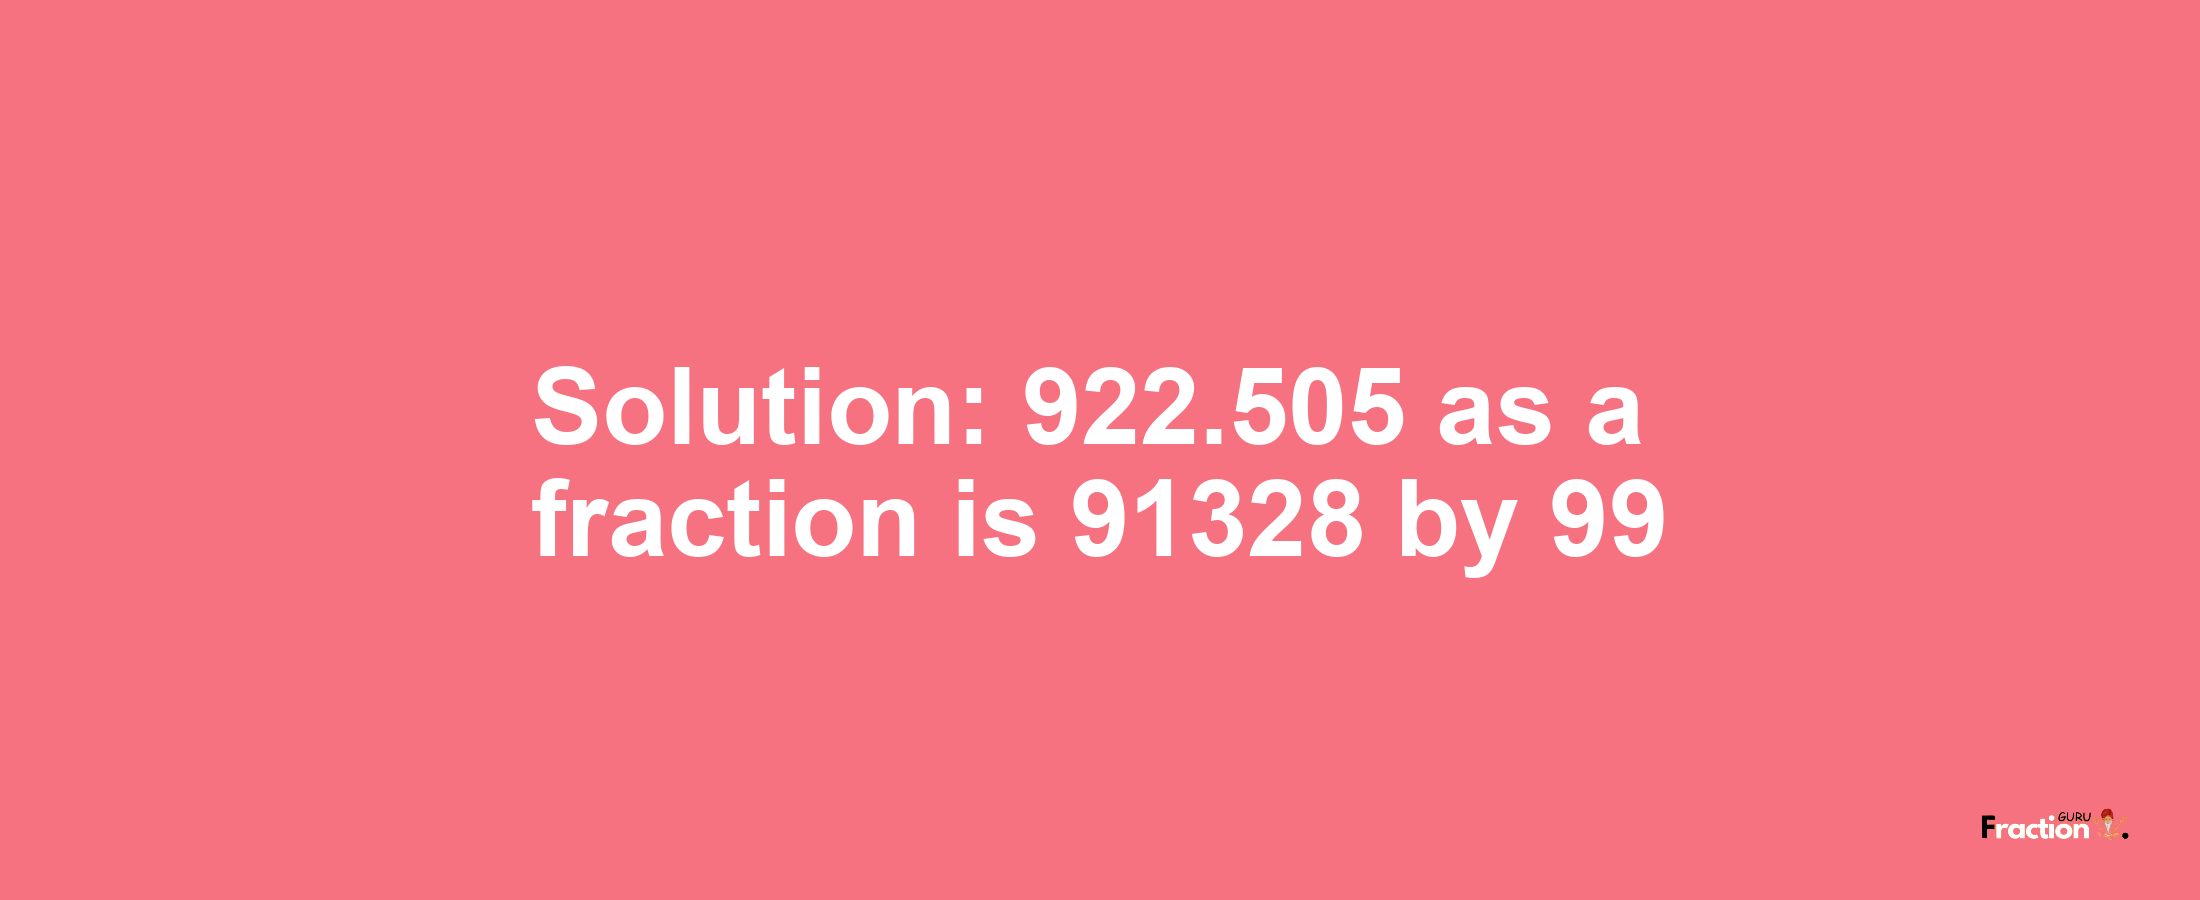 Solution:922.505 as a fraction is 91328/99